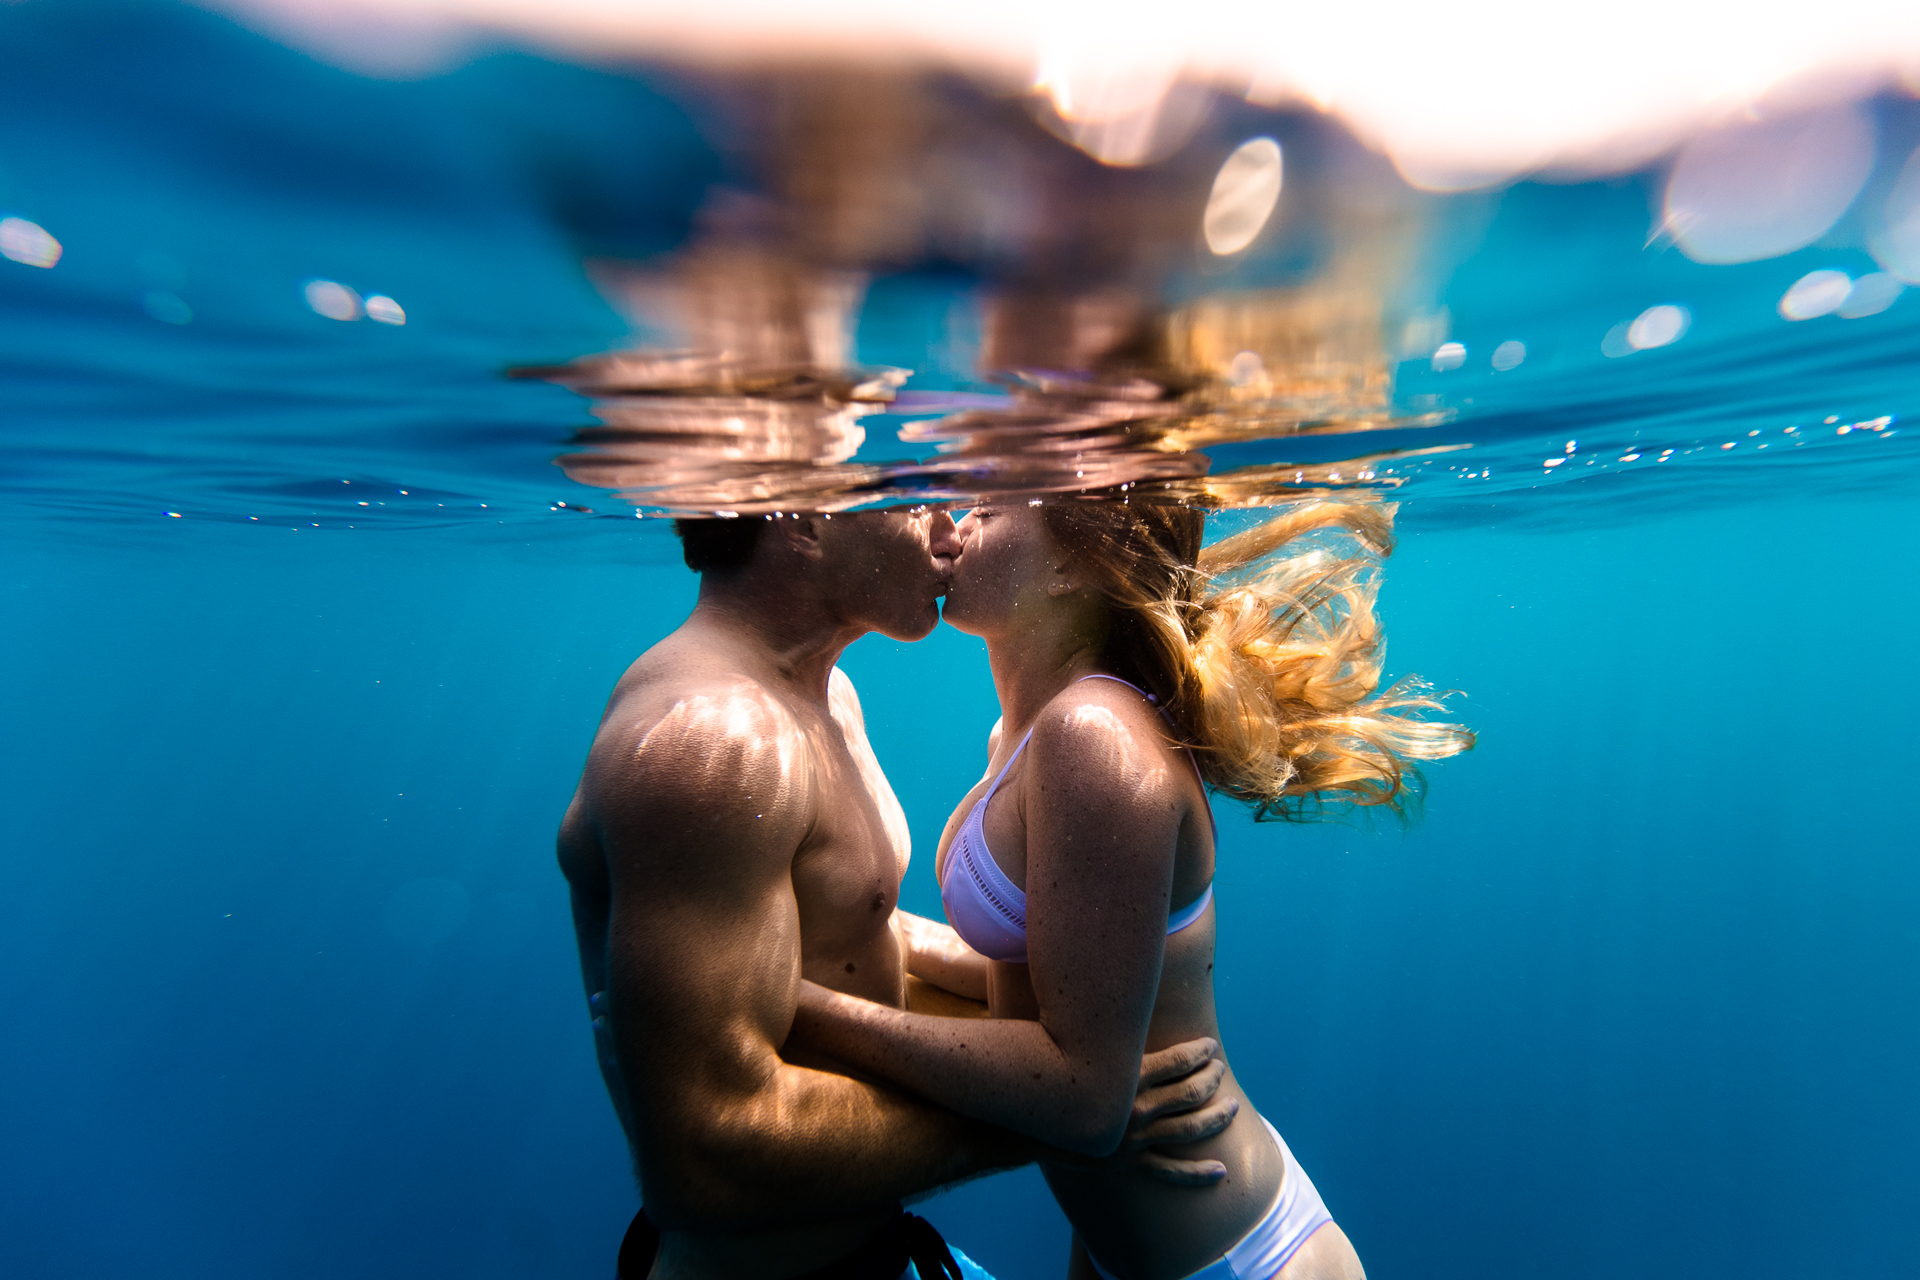  Underwater Engagement Photo Session. Taken with the clear Outex Camera Cover + Flat glass port on a Canon 5D MKIV + Canon 16-35mm f/2.8 wide angle lens. 